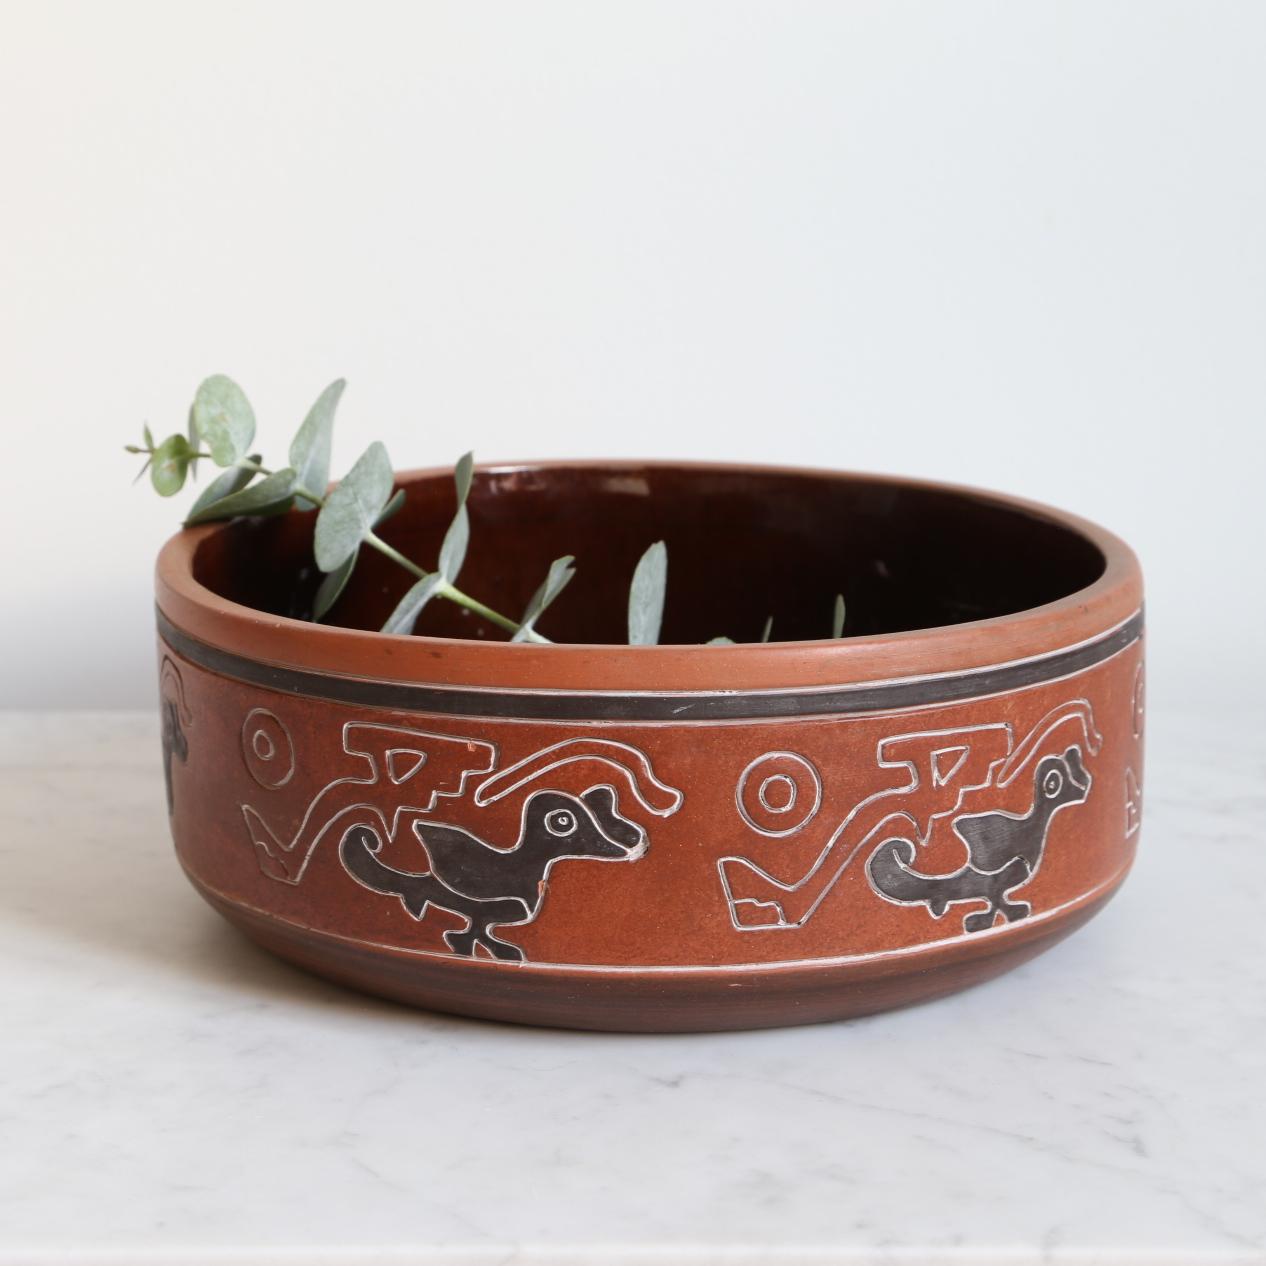 Late 20th Century Vintage Ceramic Center Piece Bowl, Mexican Pottery